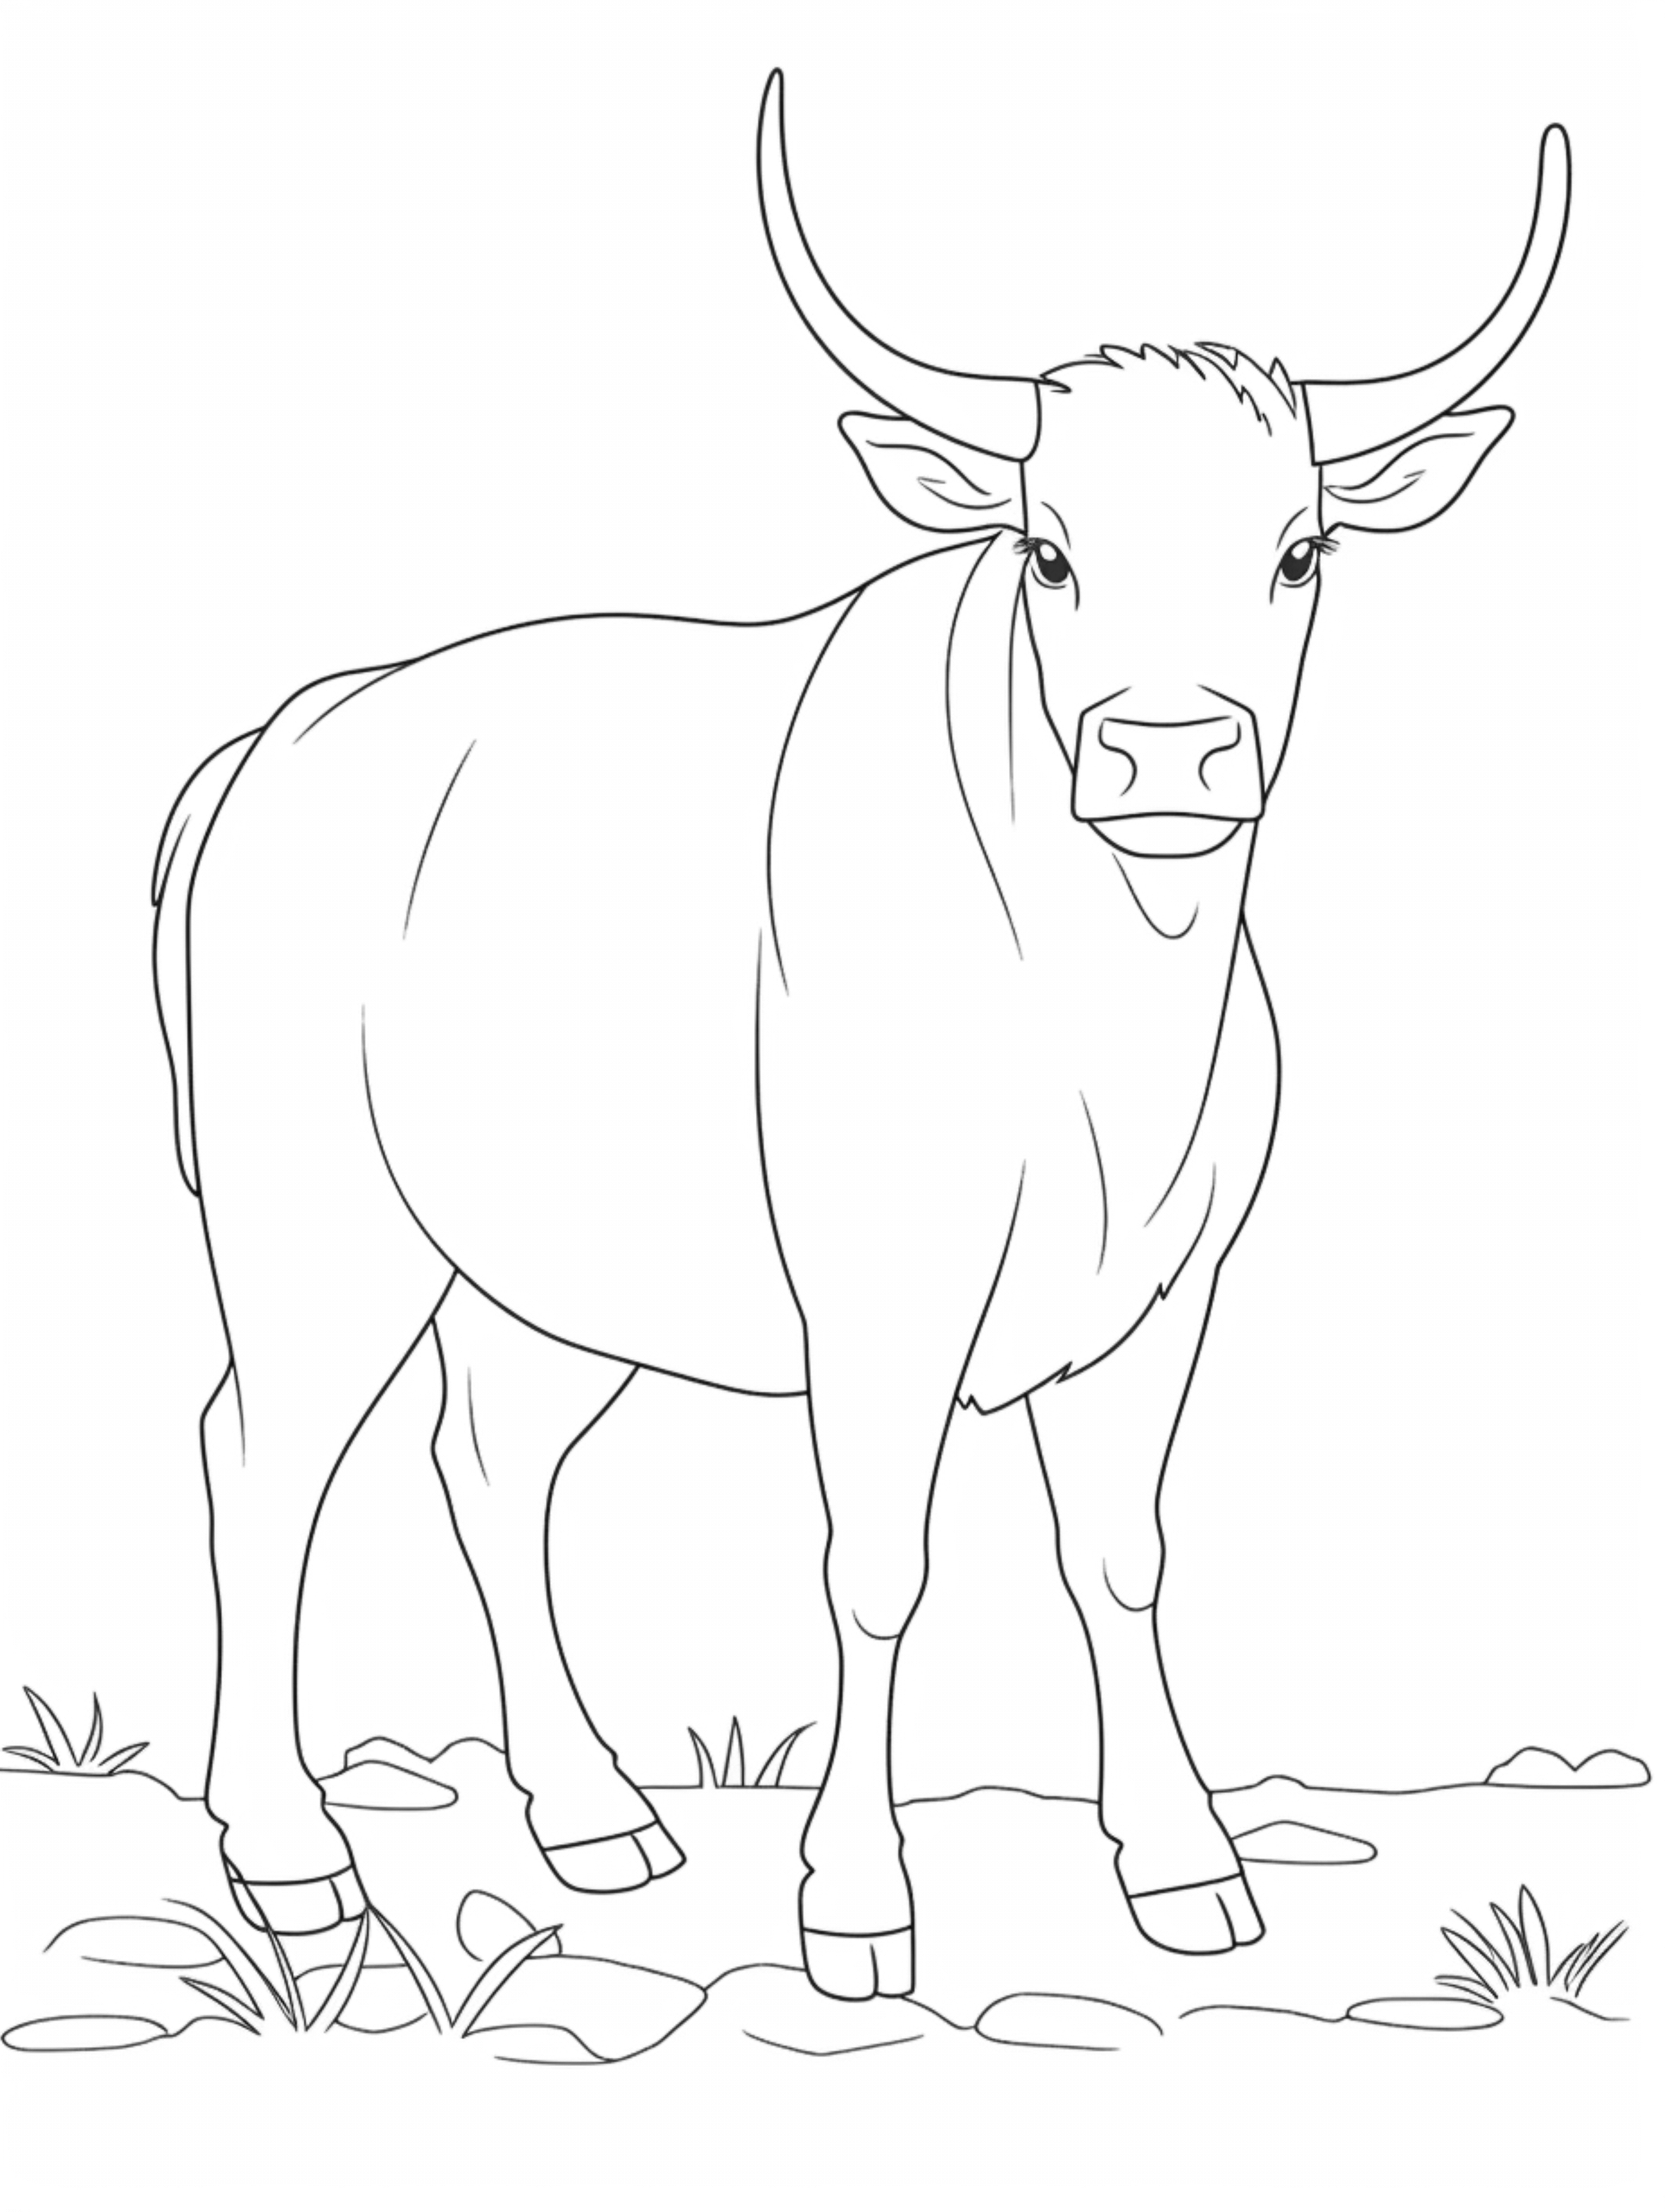 01 cute longhorn in its habitat coloring page for ki